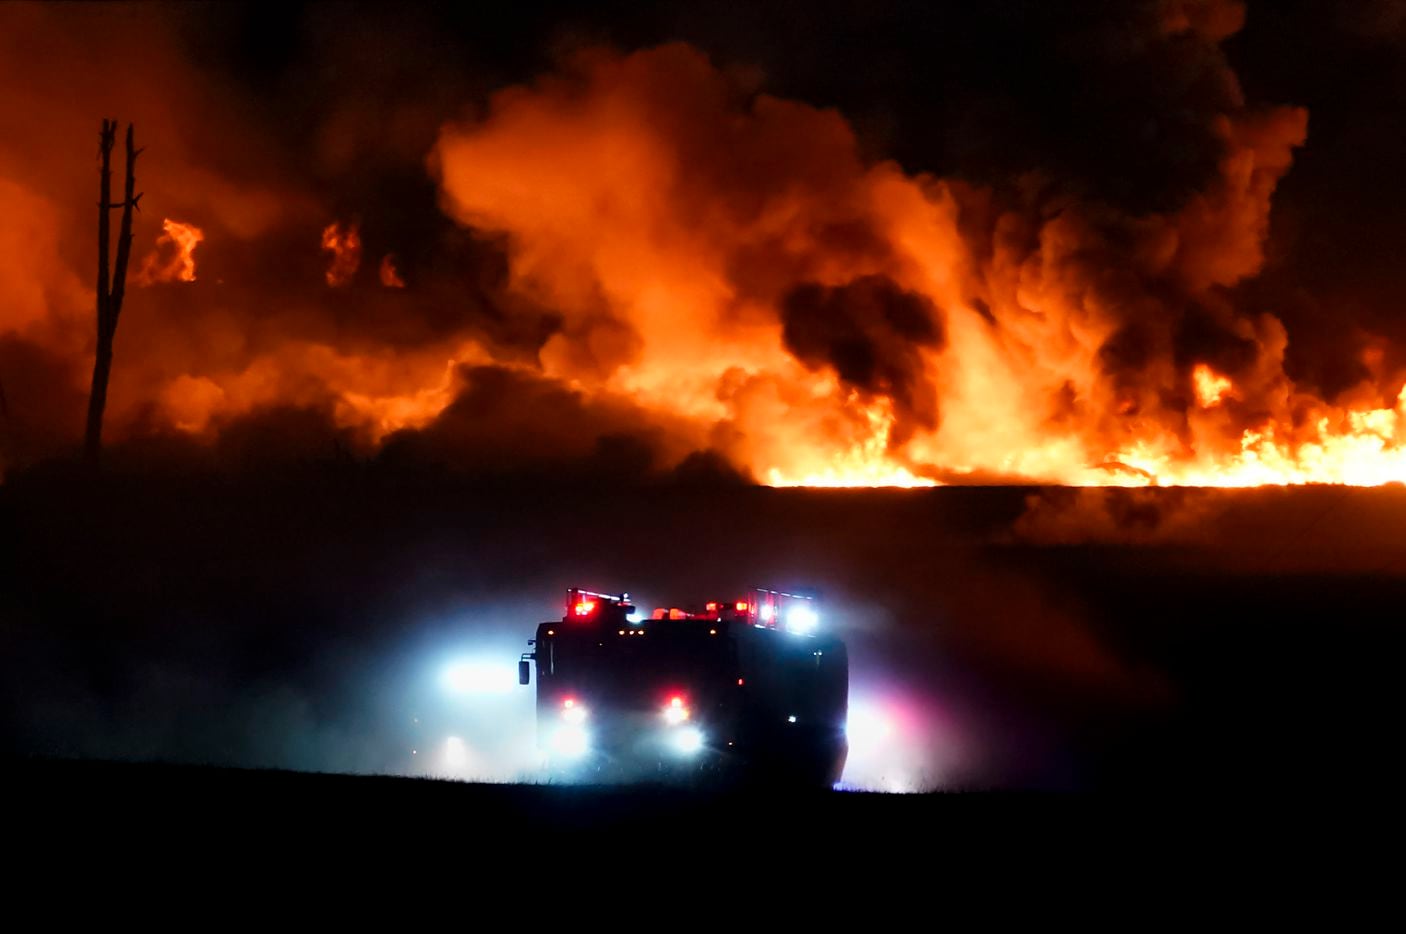 Fire crews battle a massive blaze in an industrial area of Grand Prairie in the early morning hours of Wednesday, Aug. 19, 2020.